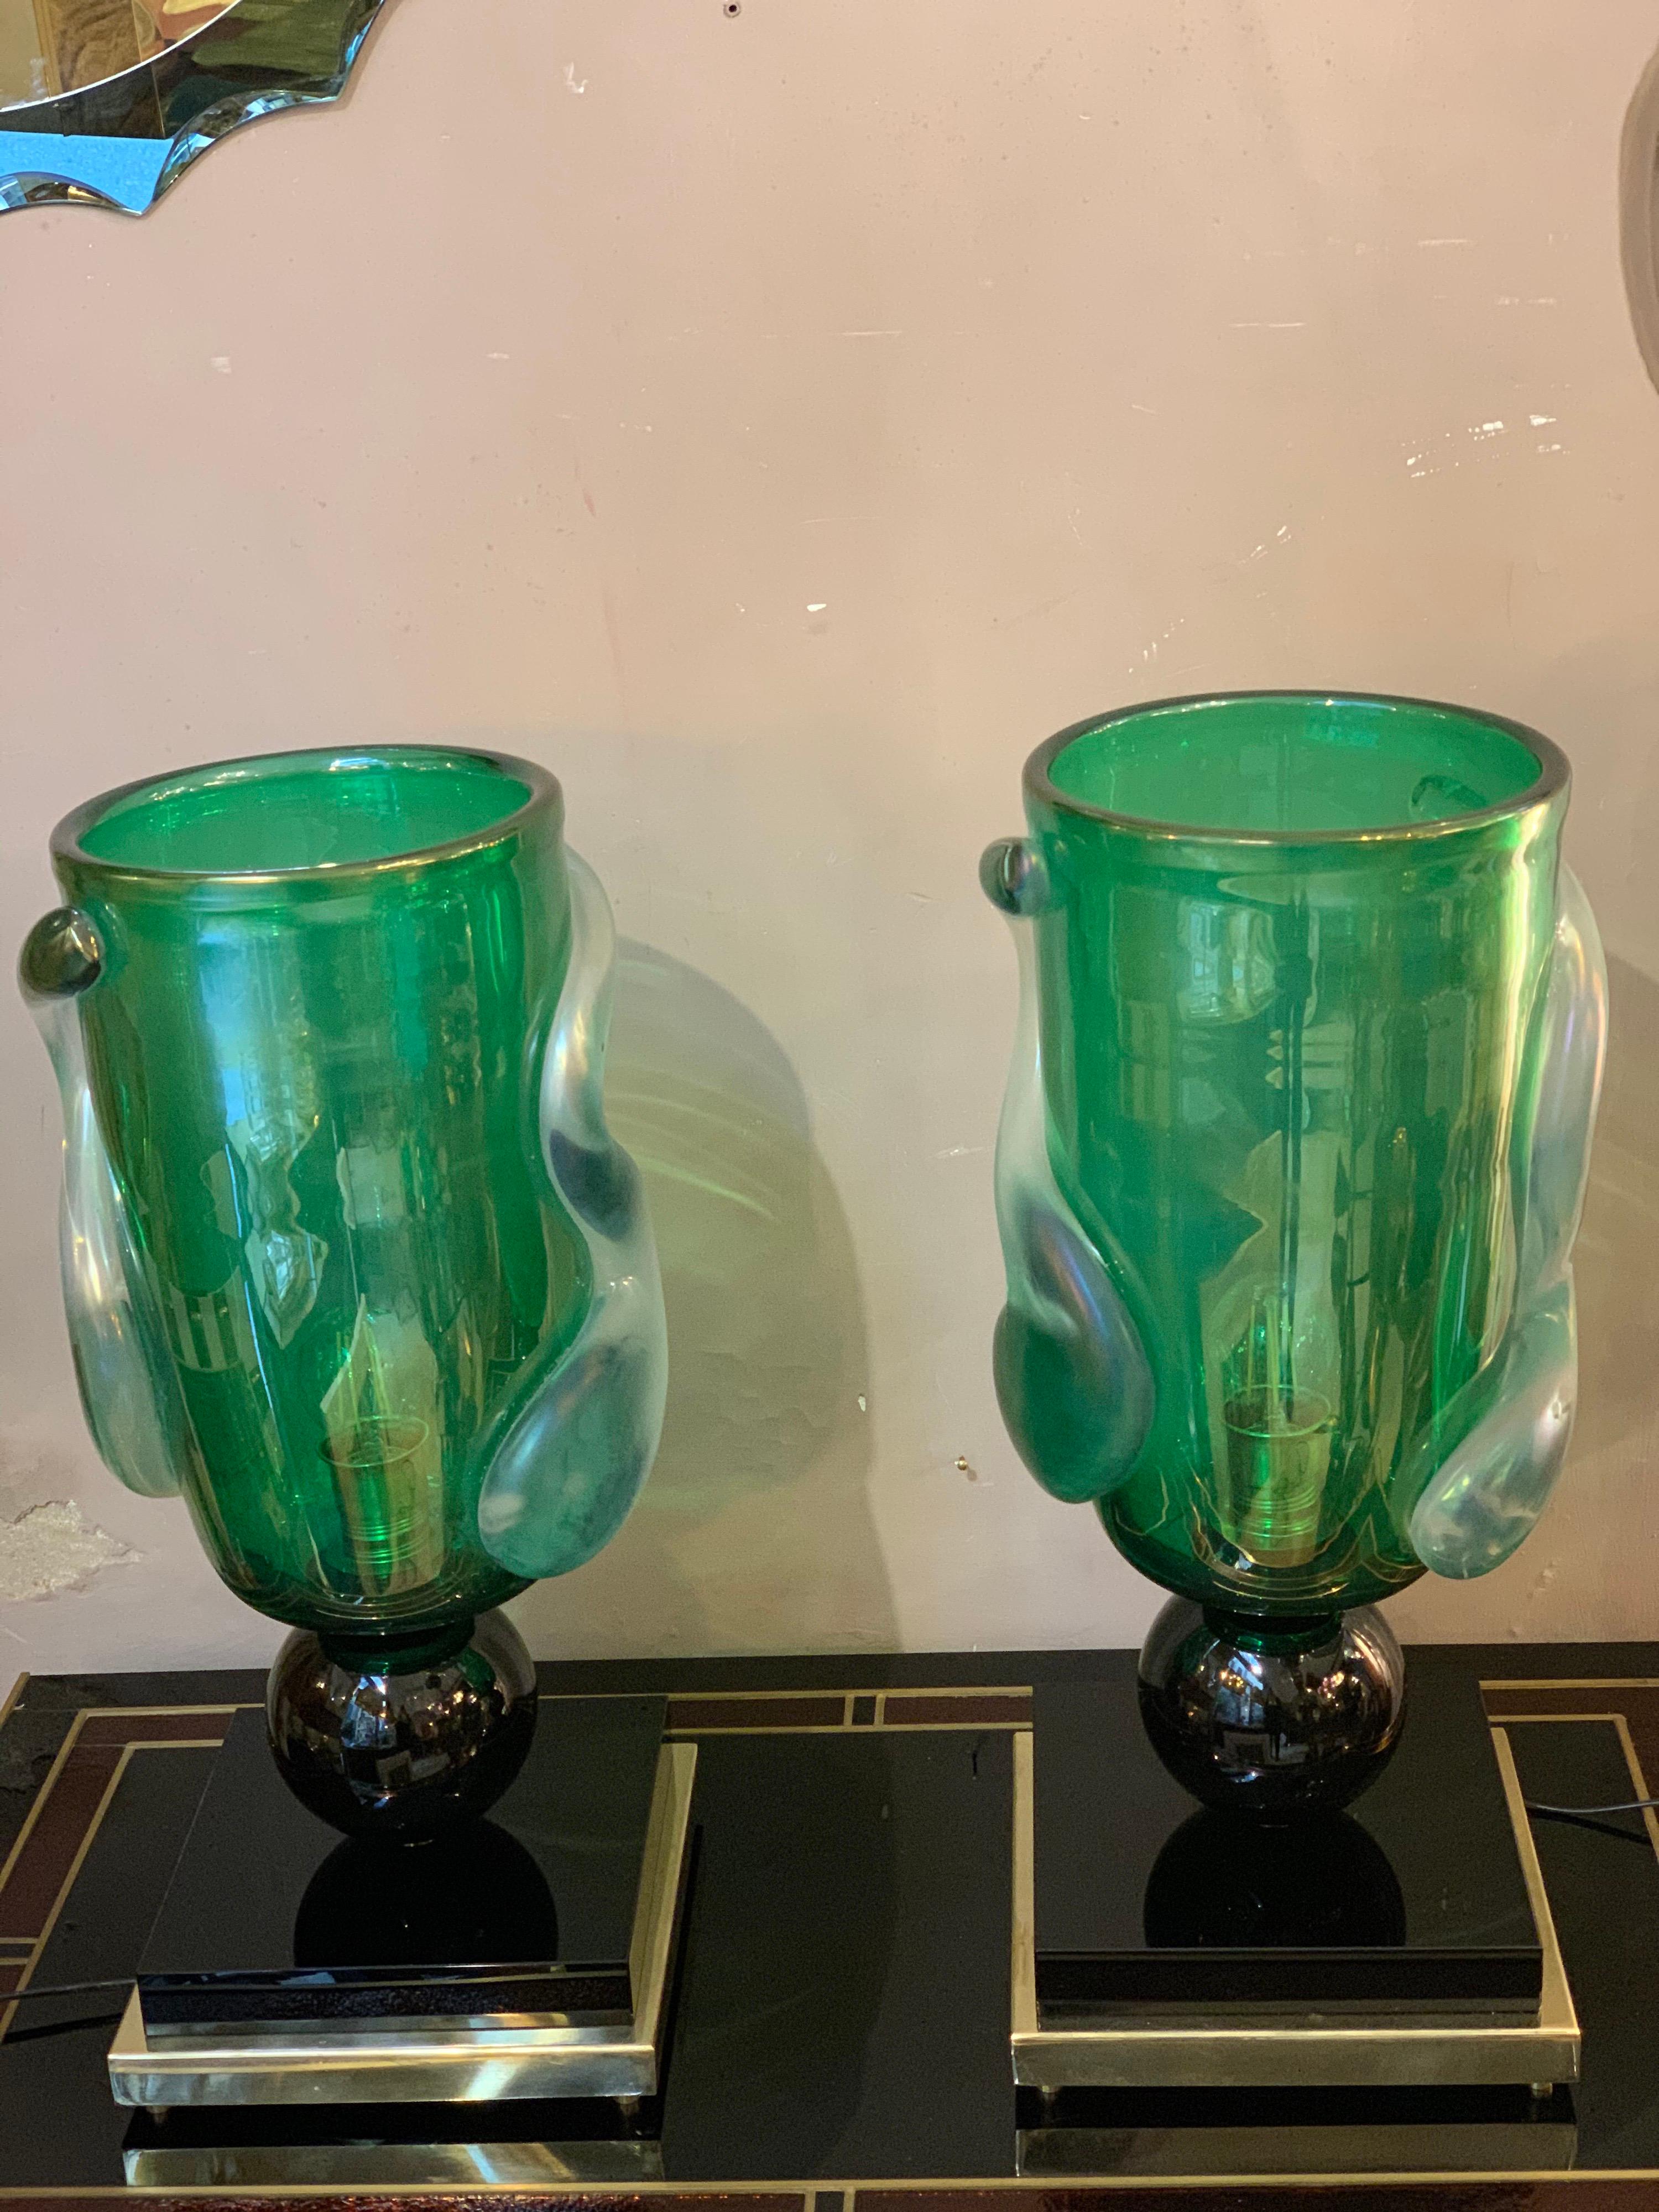 Pair of green hand blown Murano glass table lamps by Costantini Murano.
The body of the lamp is decorated with spiral freeform iridescent reliefs.
The base is made of brass and black Murano glass. One bulb each lamp.
The base measures: cm 25 x